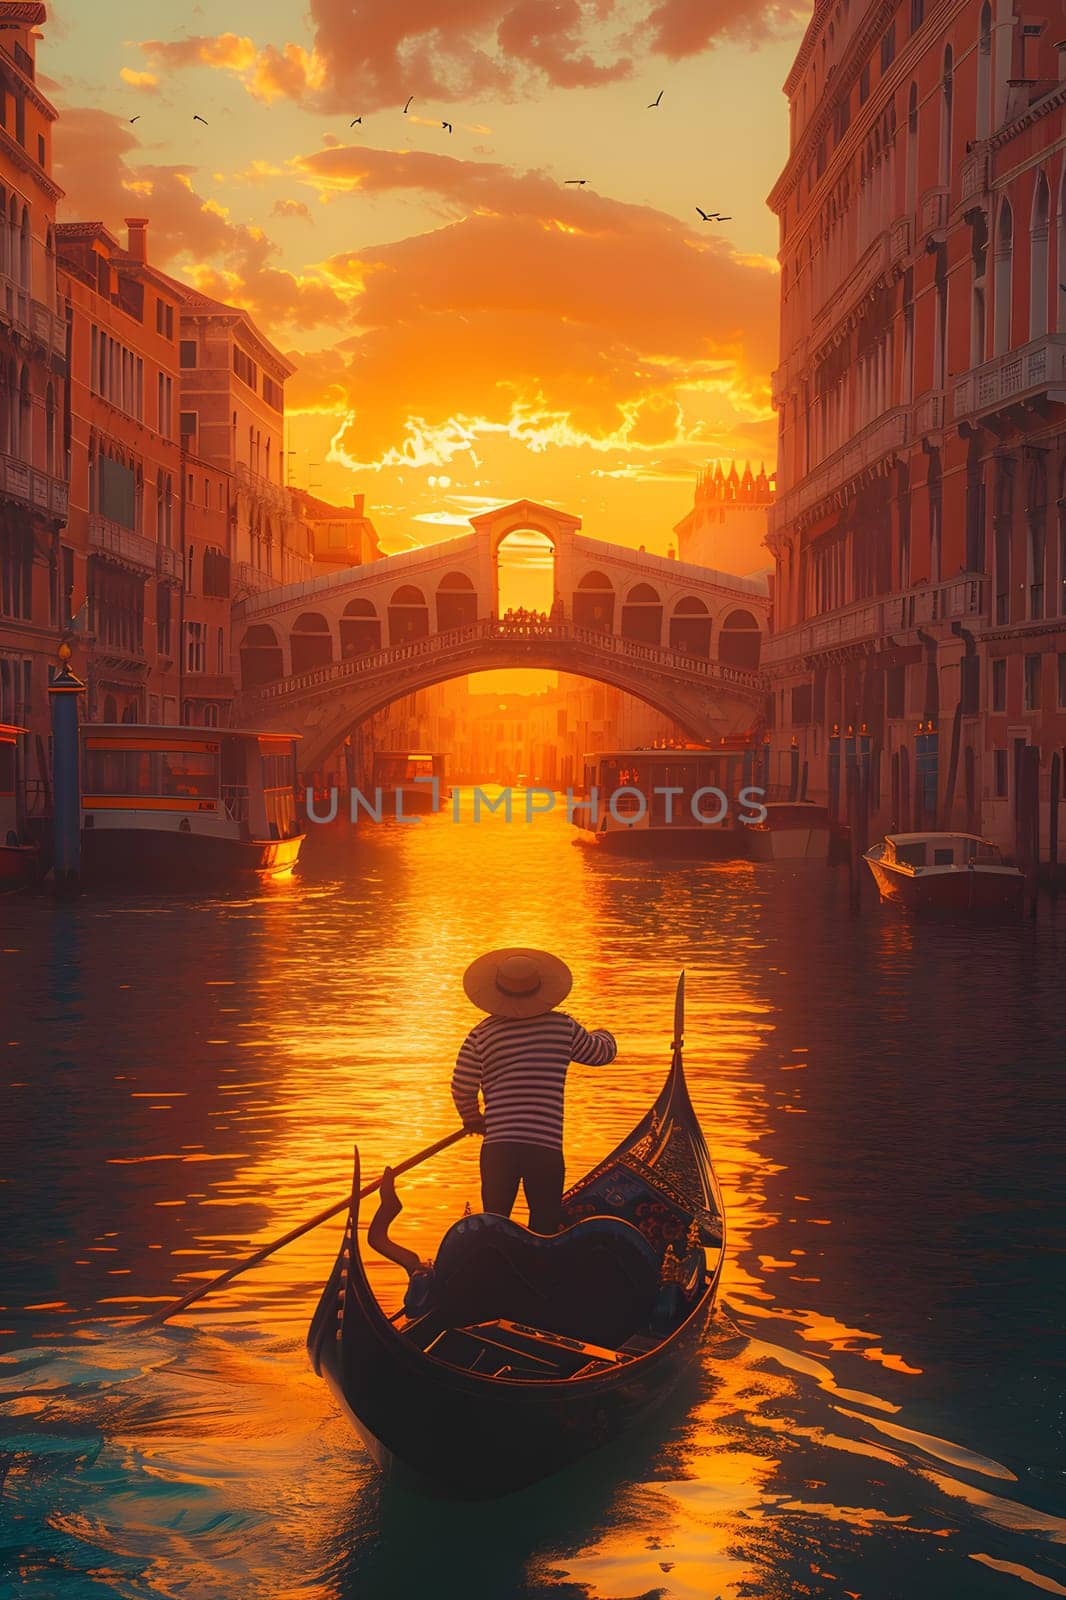 A man is cruising in a gondola on the water during sunset, surrounded by beautiful clouds and a colorful sky